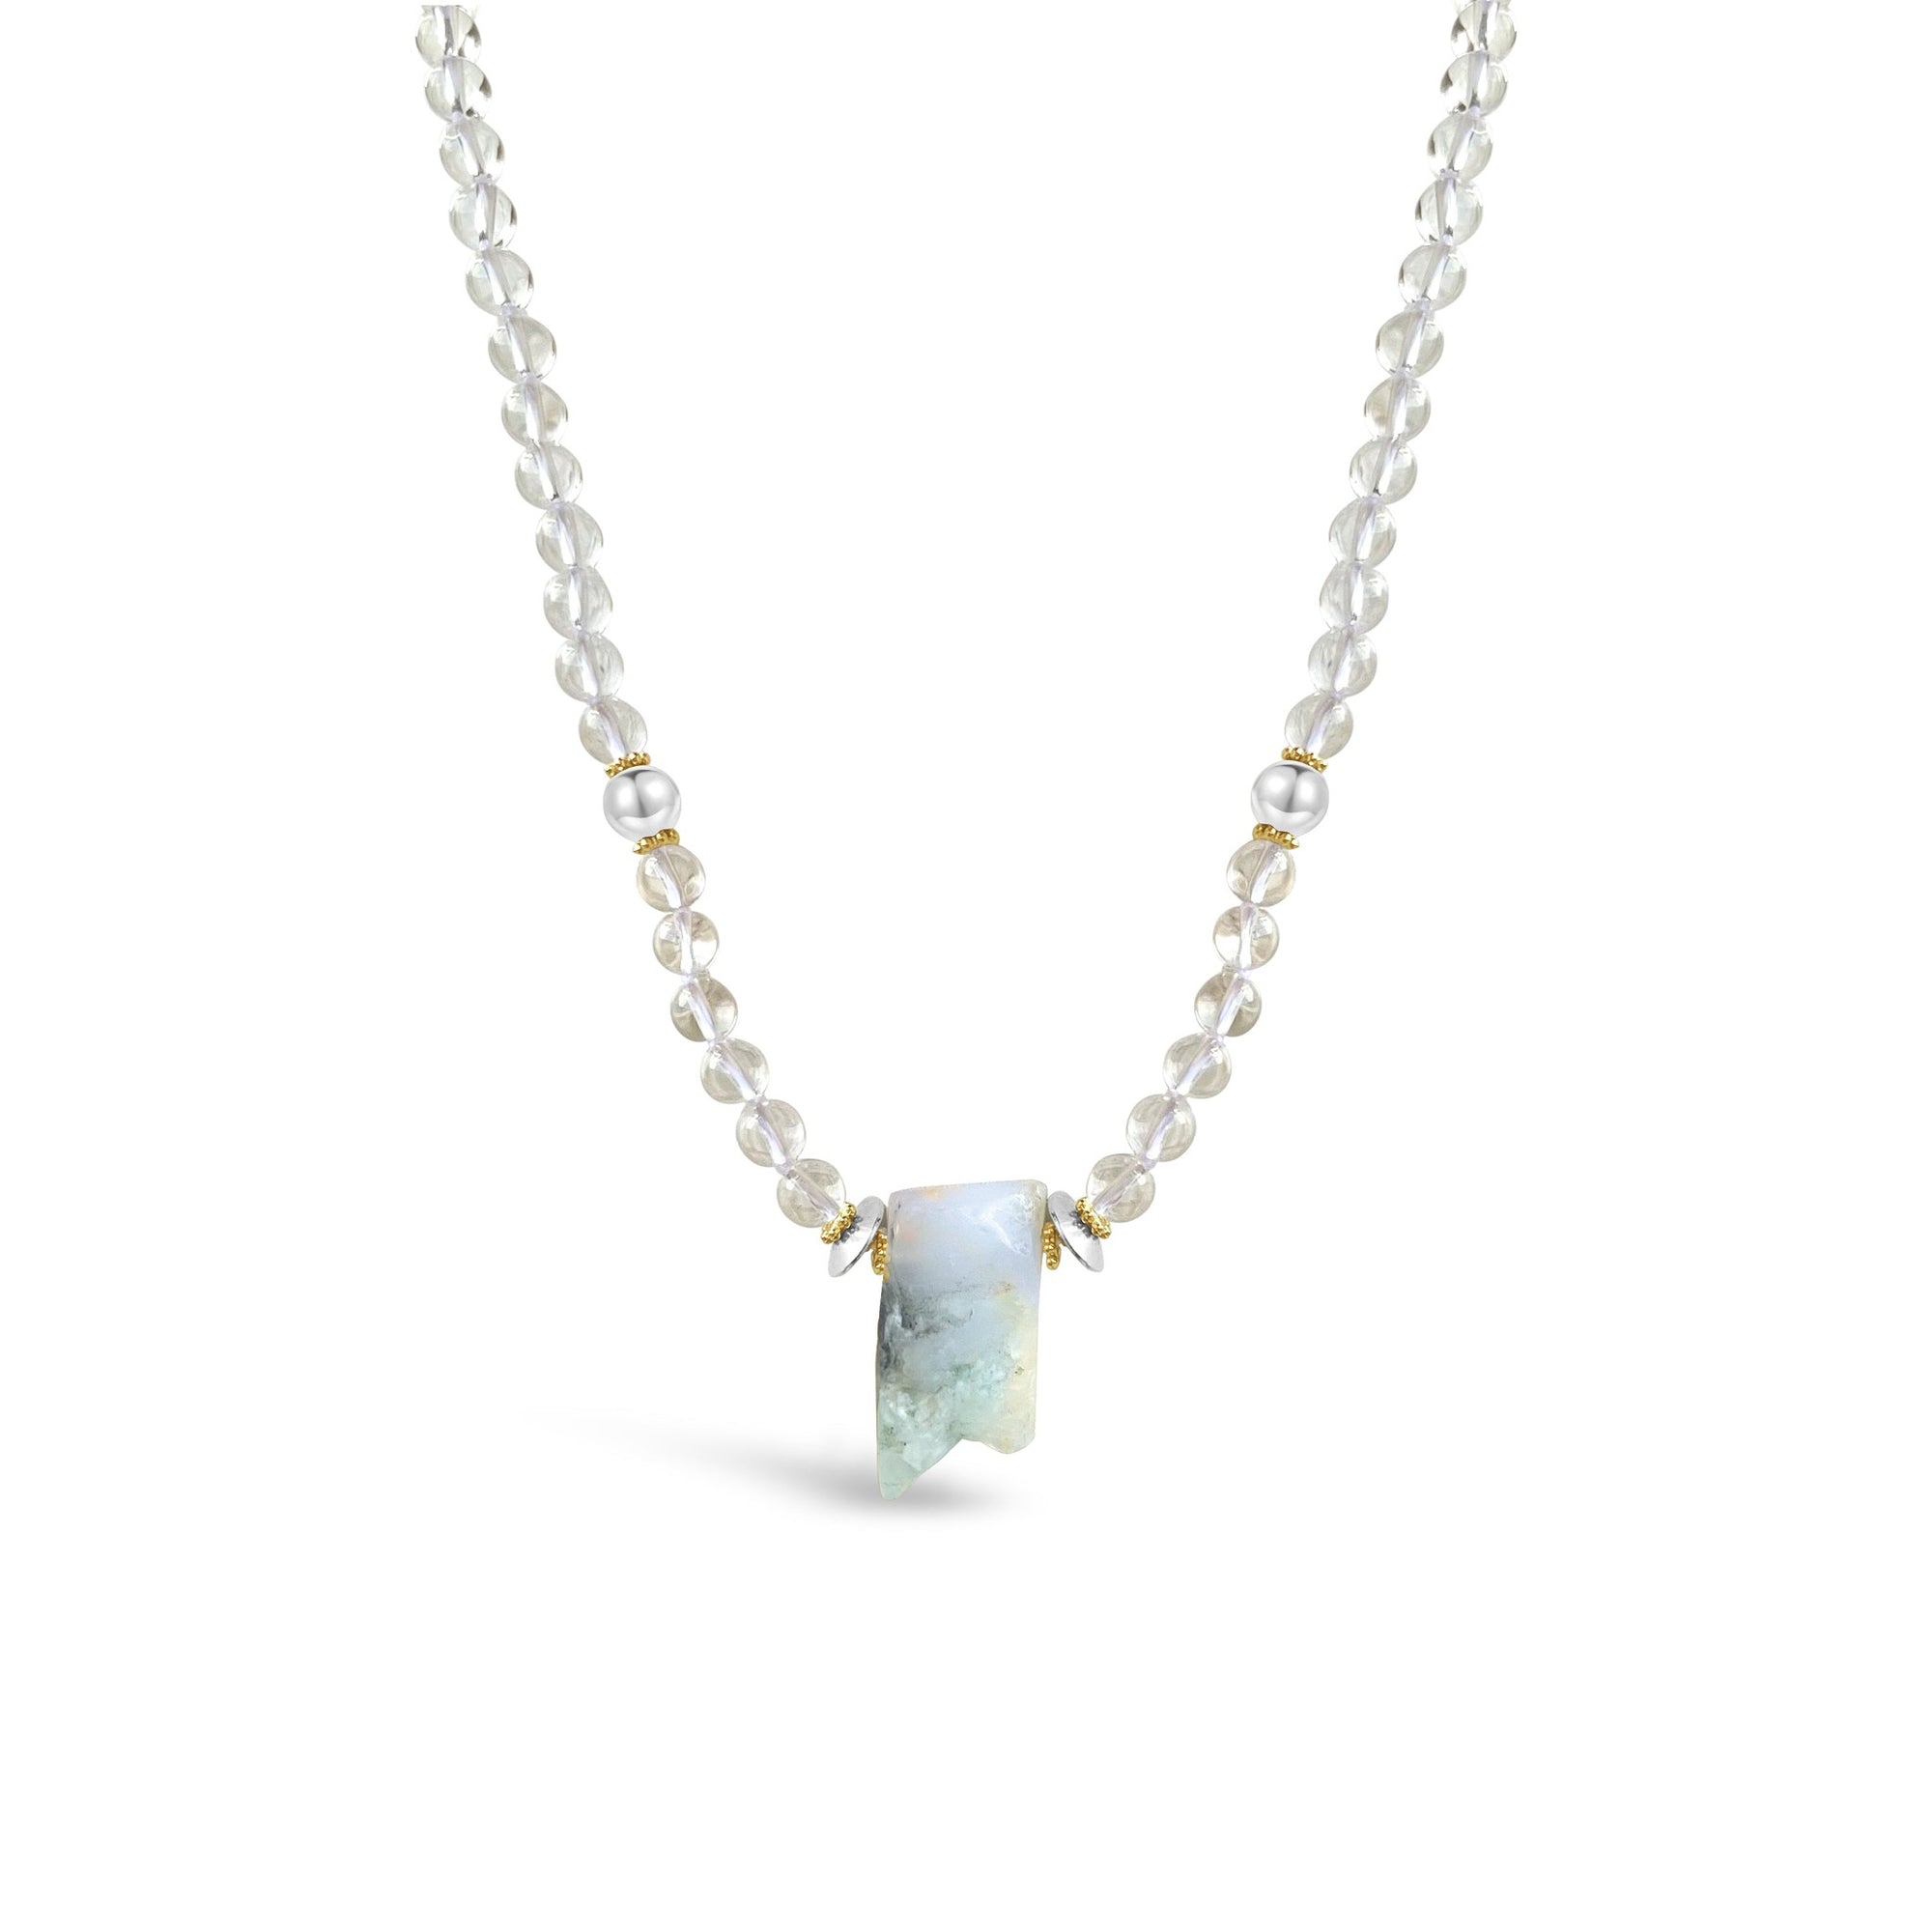 Clear Quartz Crystal Necklace with Chrysoprase